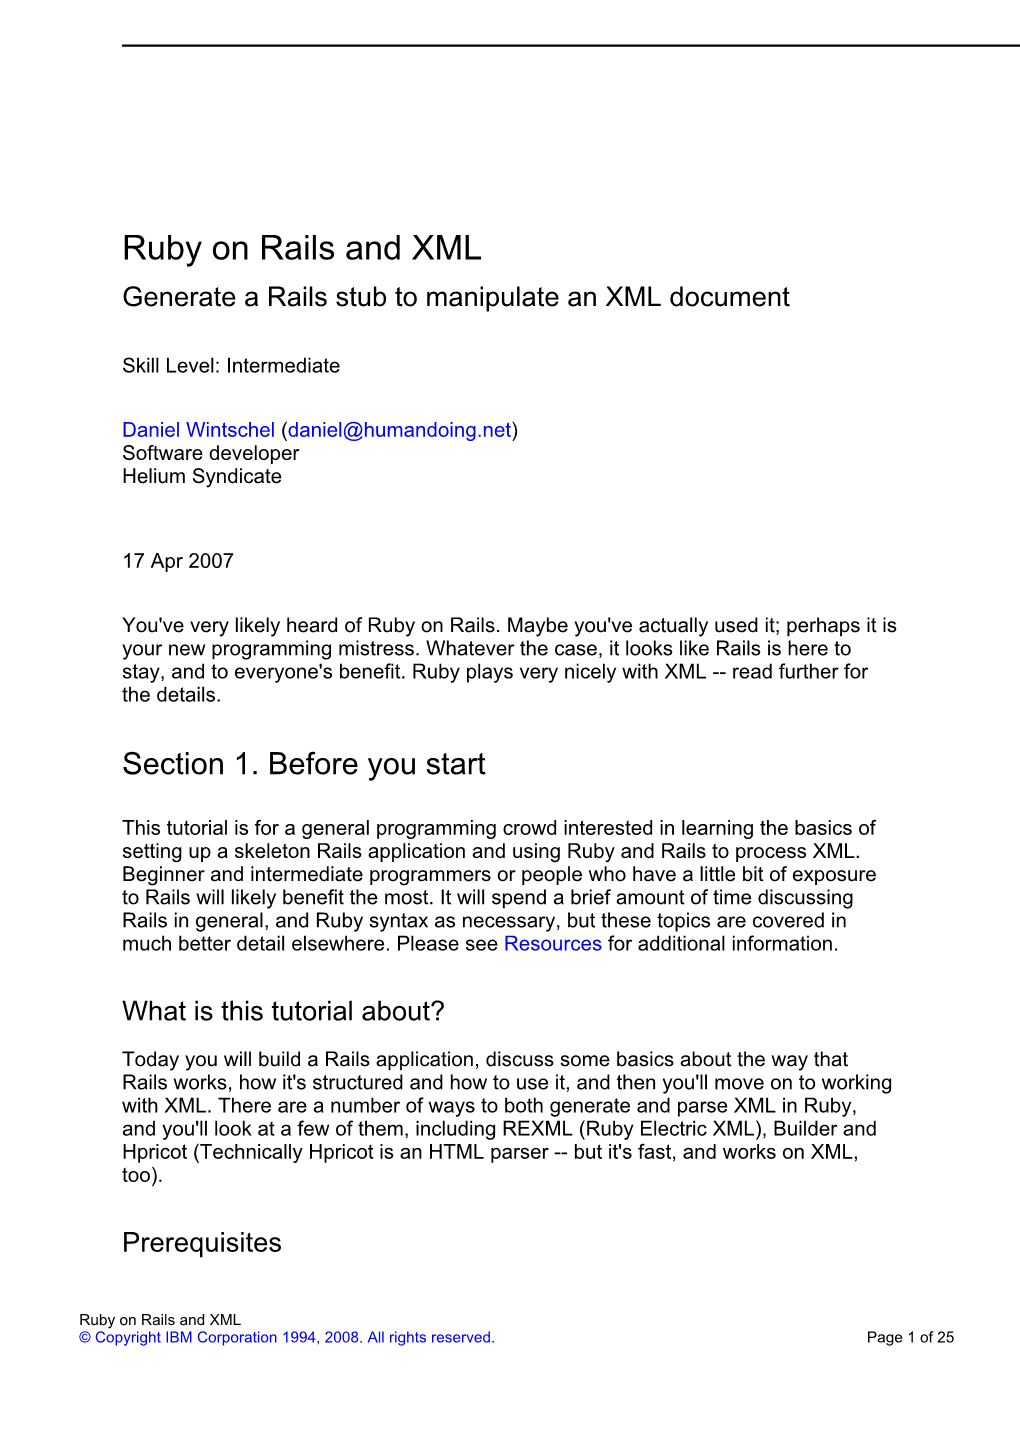 Ruby on Rails and XML Generate a Rails Stub to Manipulate an XML Document